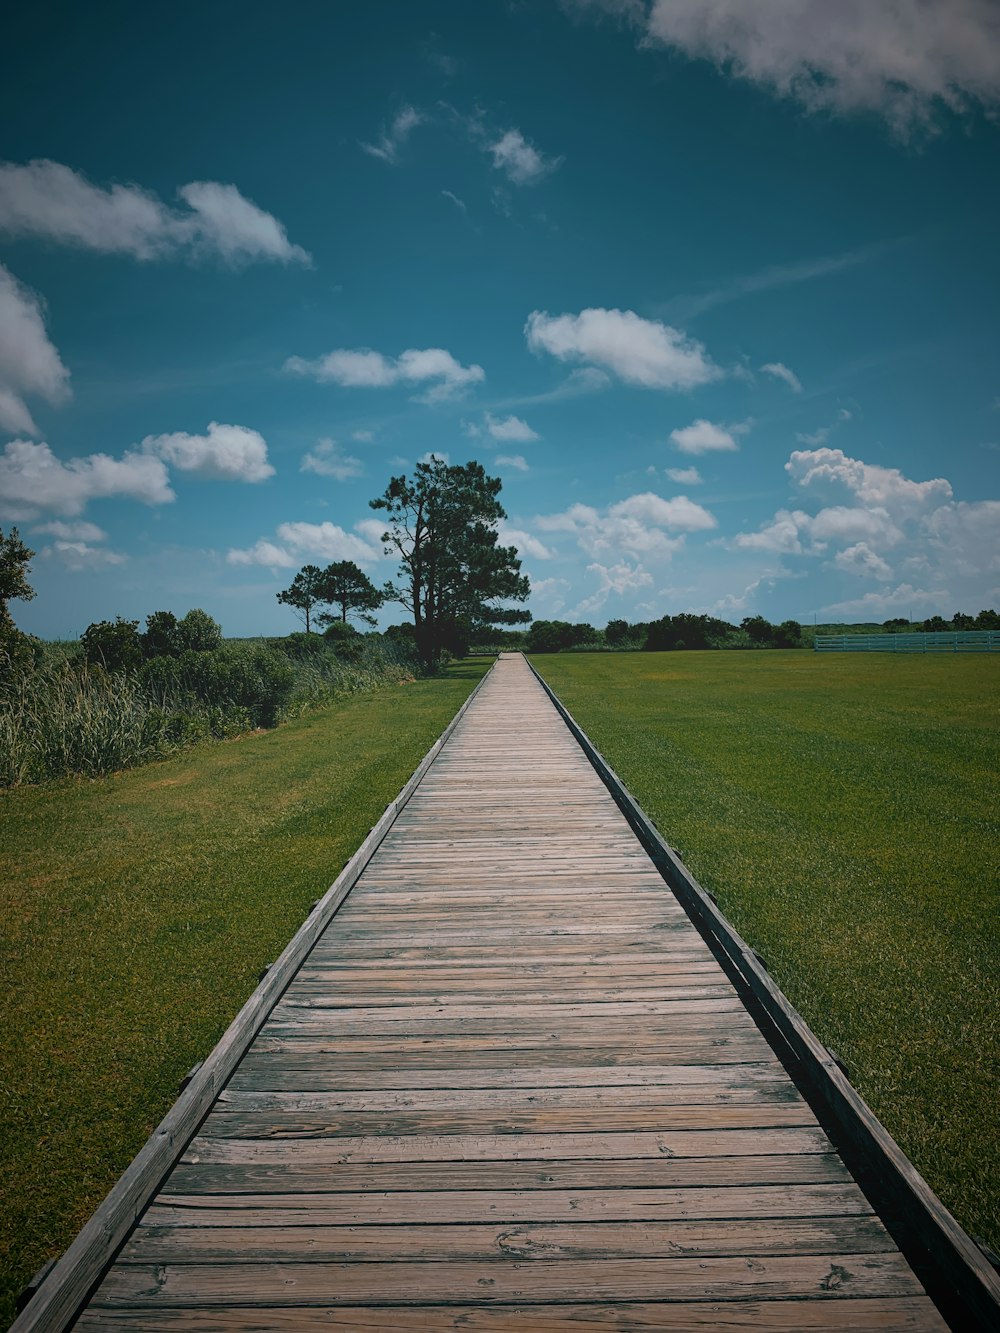 brown wooden pathway between green grass field under blue and white cloudy sky during daytime